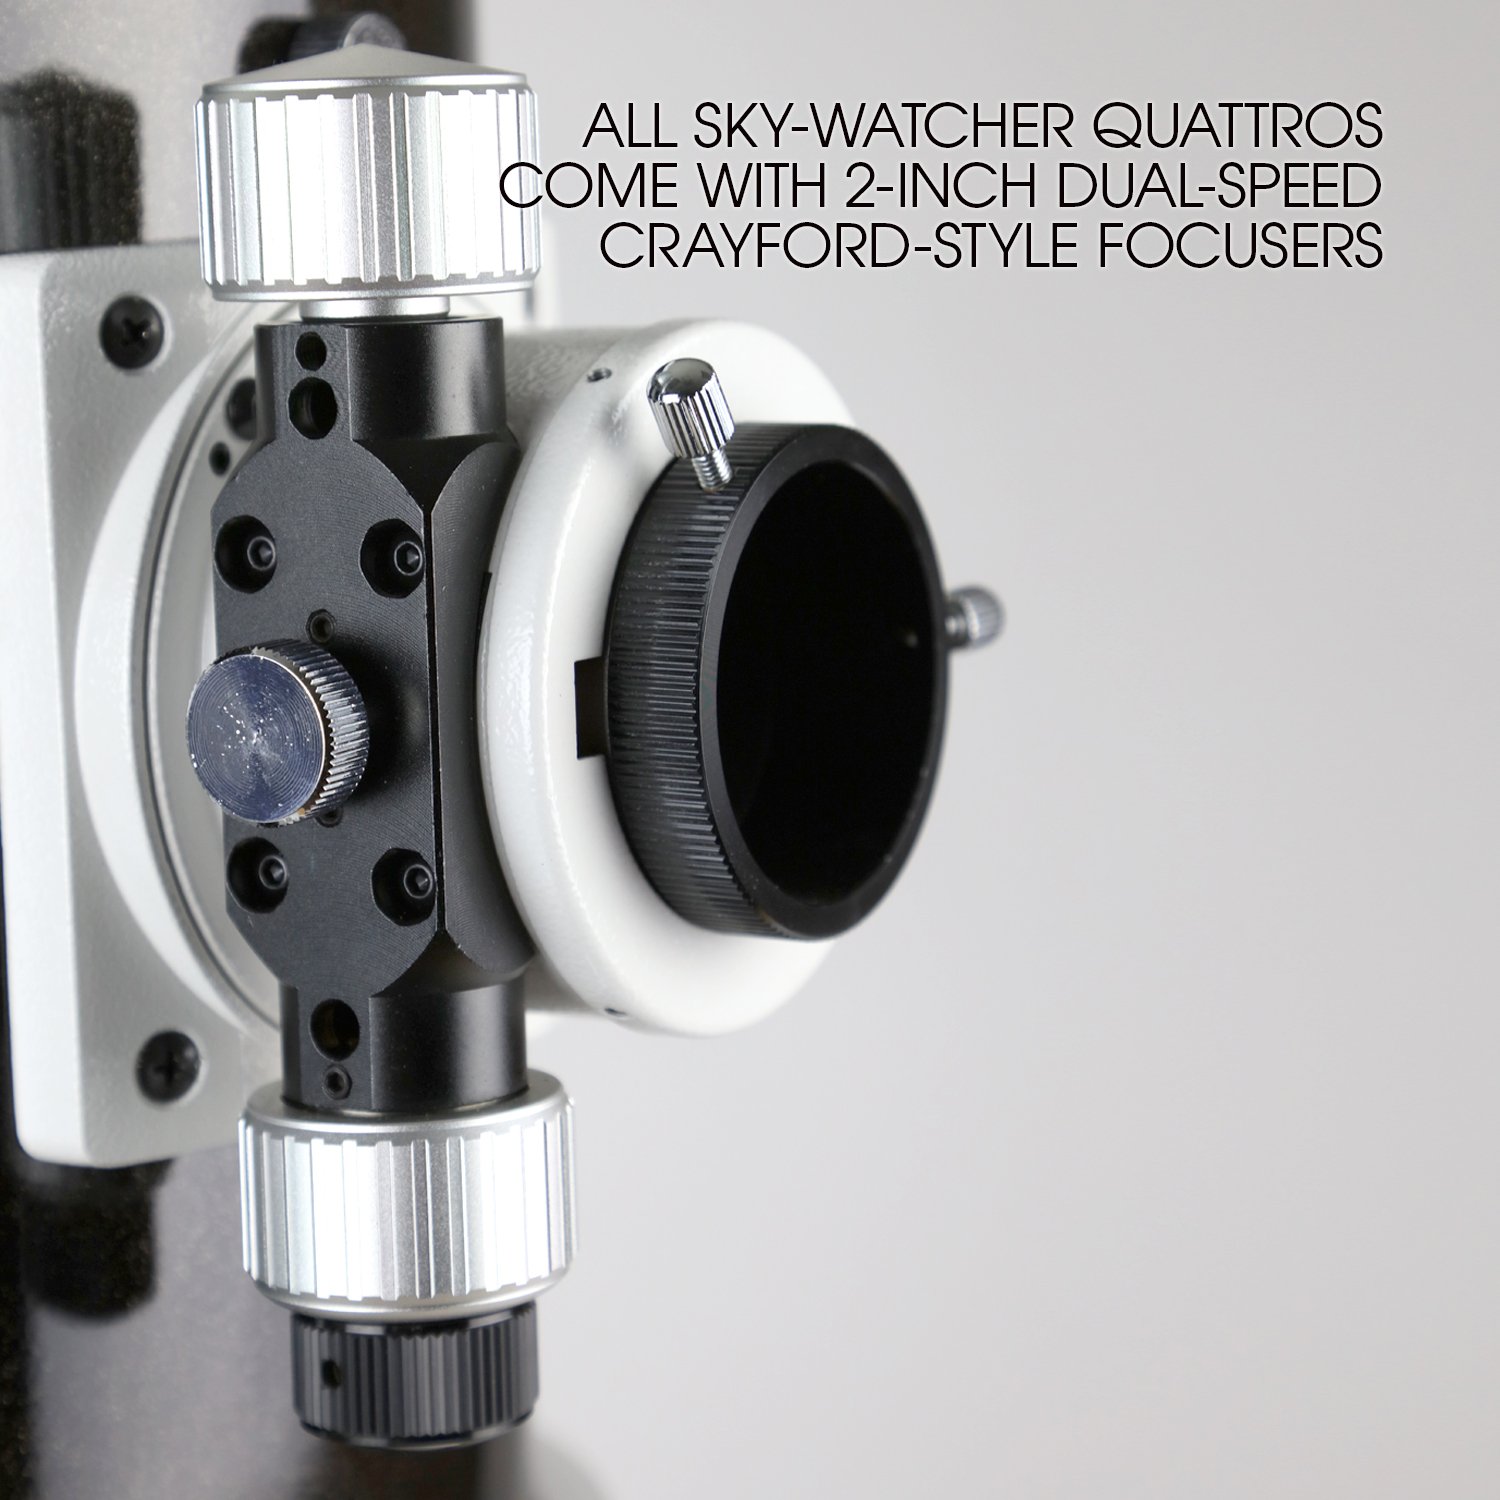 SKYWATCHER QUATTRO 200 ST REFLECTOR TELESCOPE WITH DUAL AXIS EQ5 MOUNT (5)